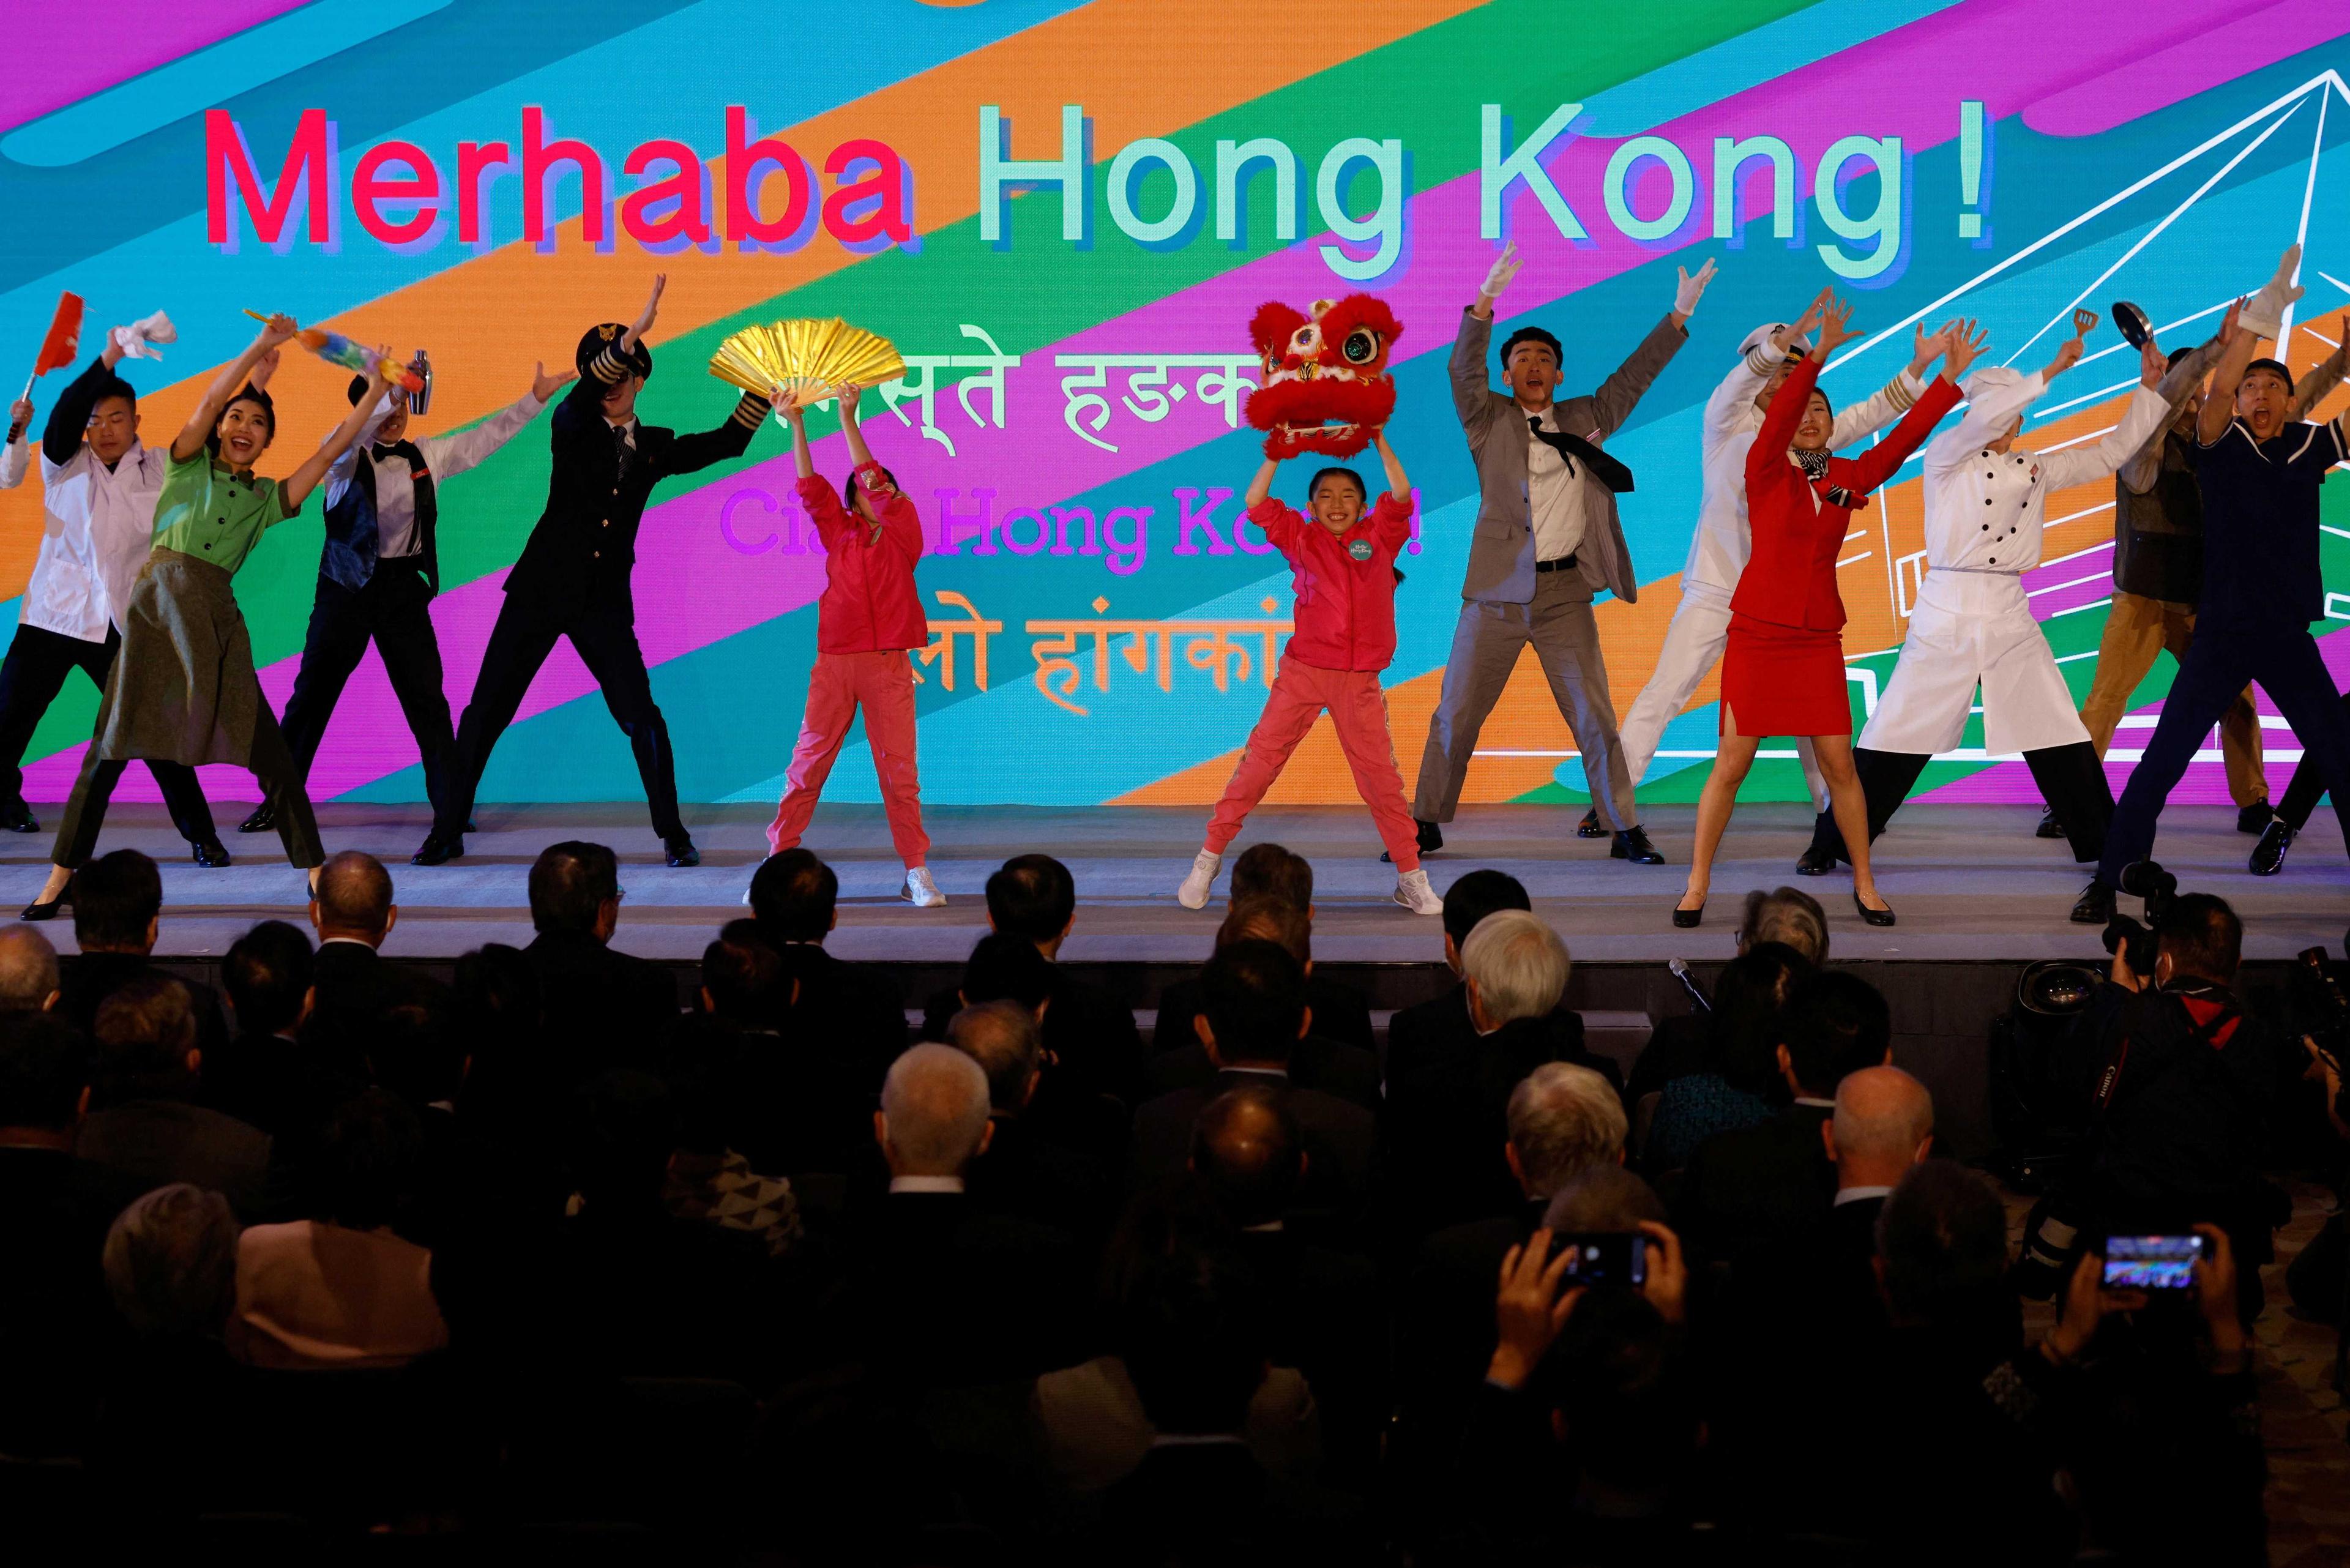 Performers dance during 'Hello Hong Kong' campaign to promote city tourism in Hong Kong, China Feb 2. Photo Reuters